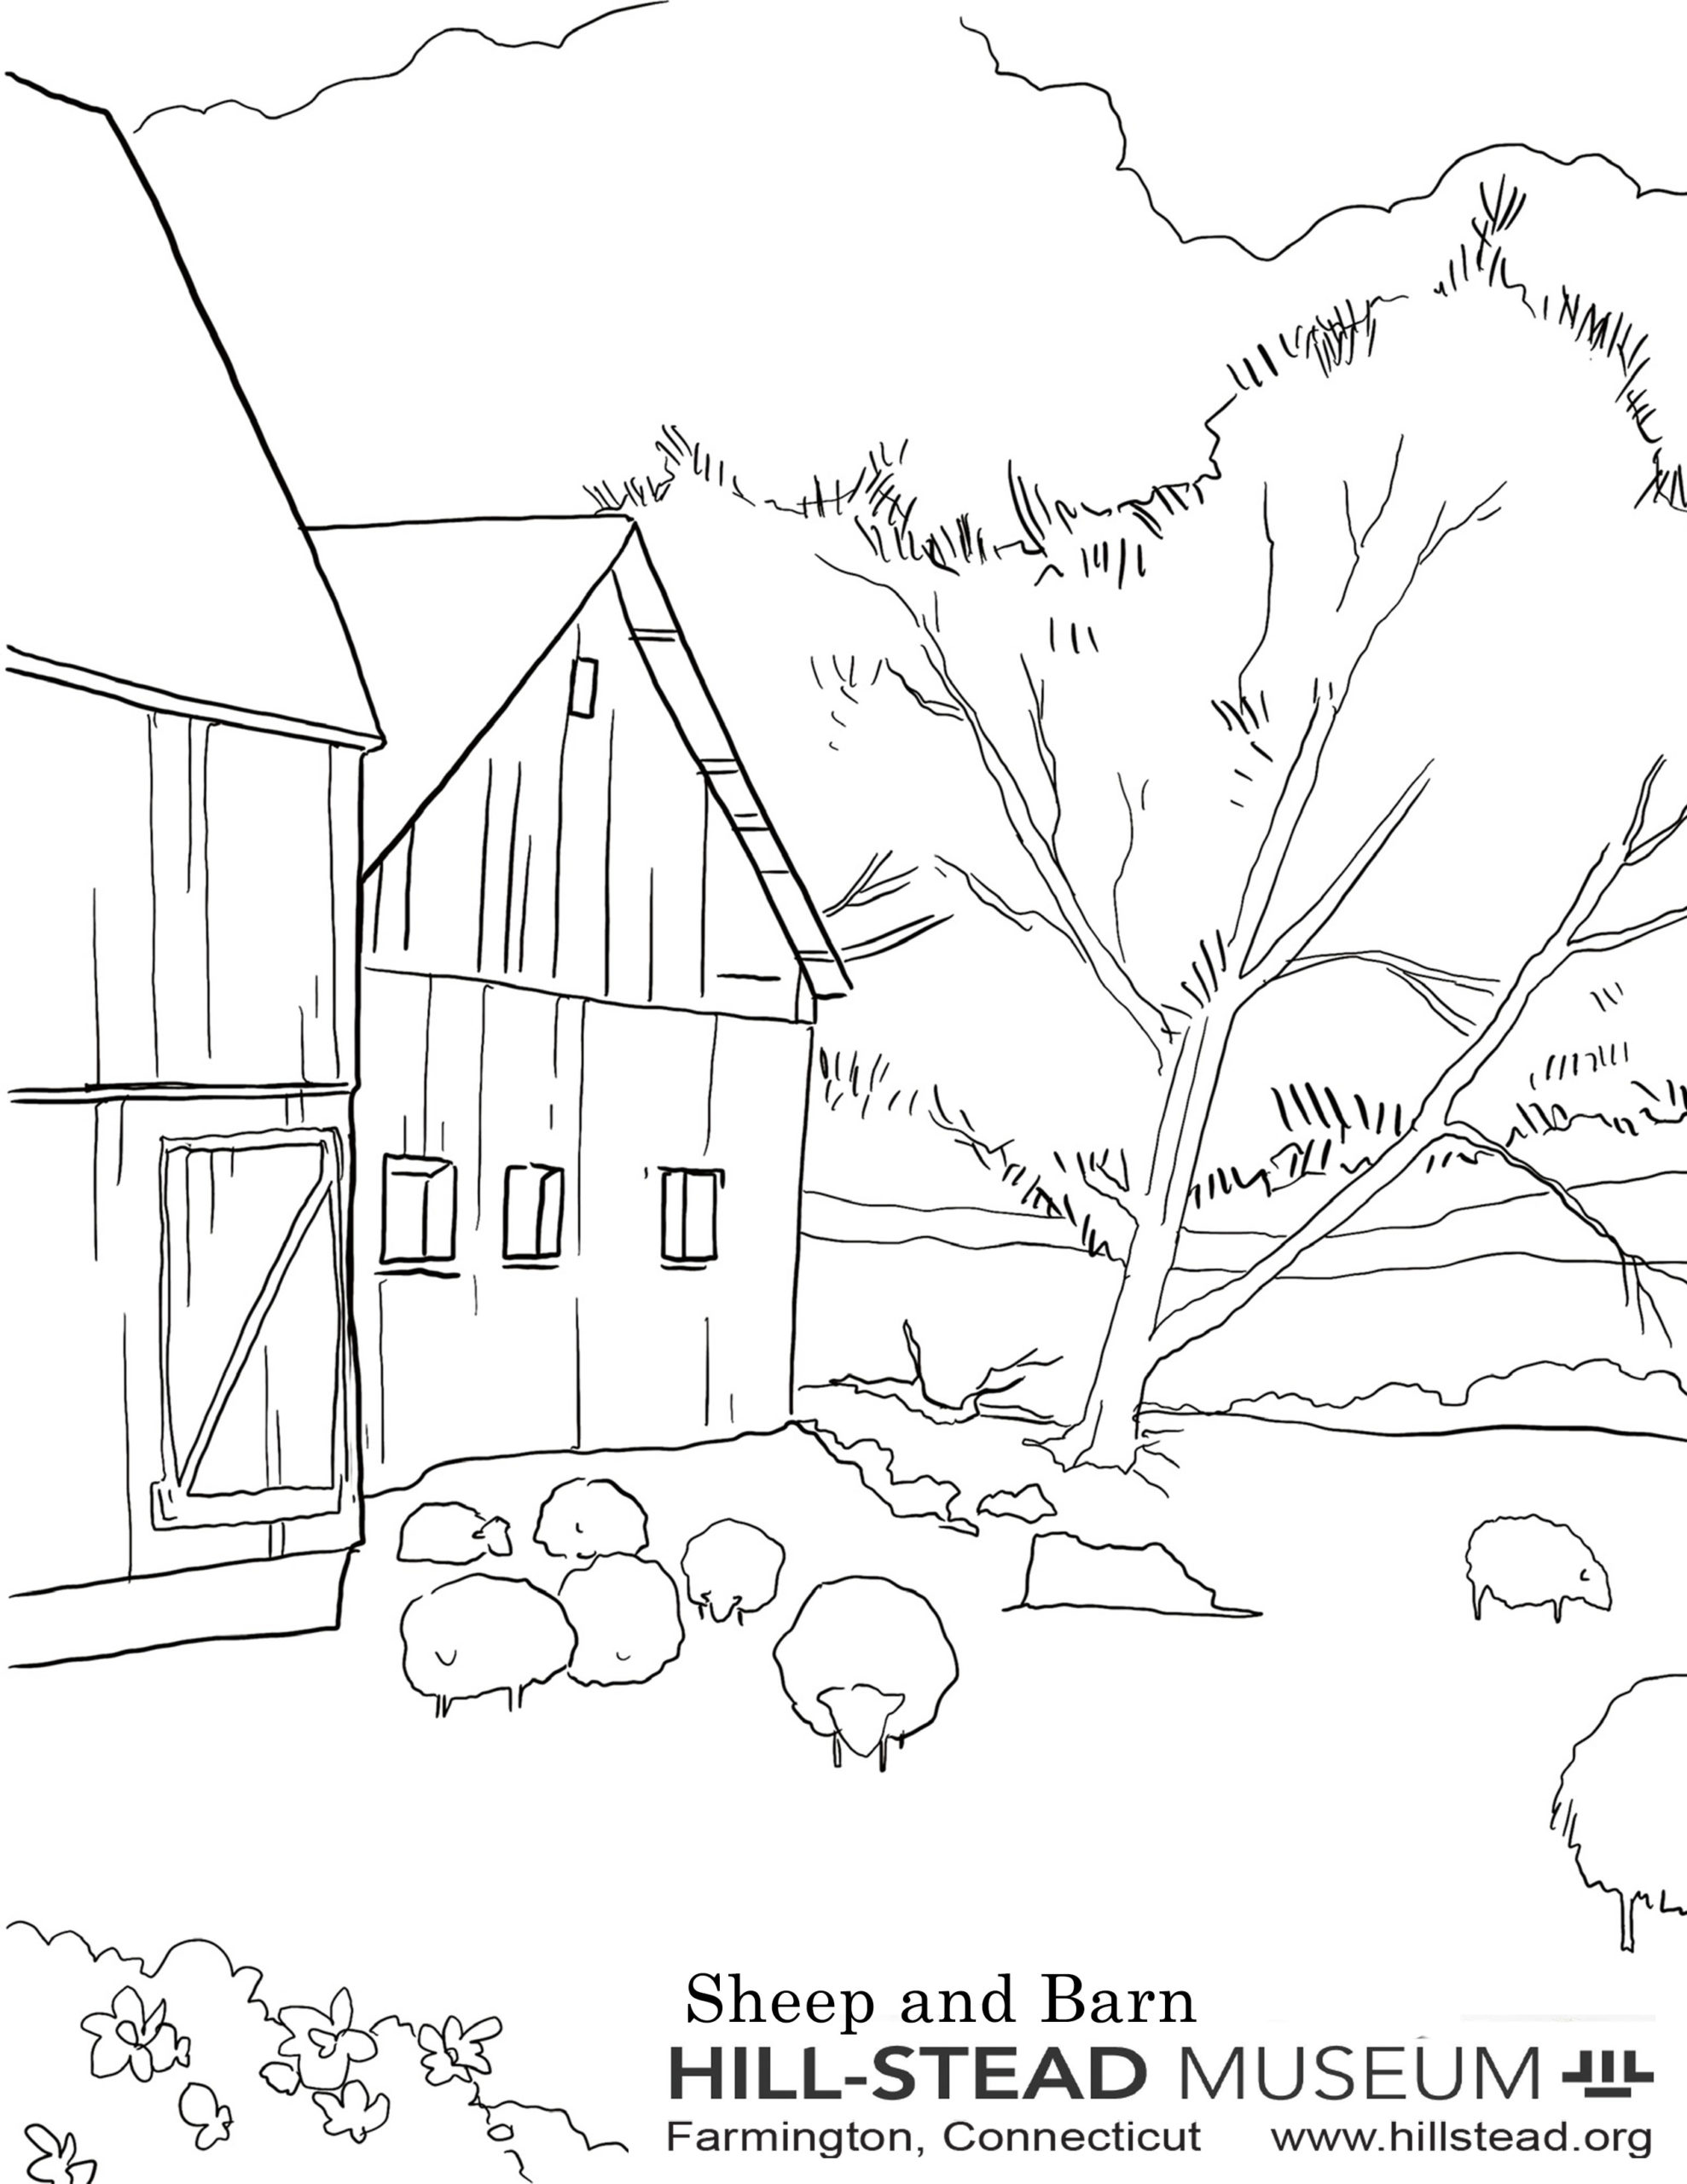 Hill-Stead Coloring Pages - Hill-Stead Museum